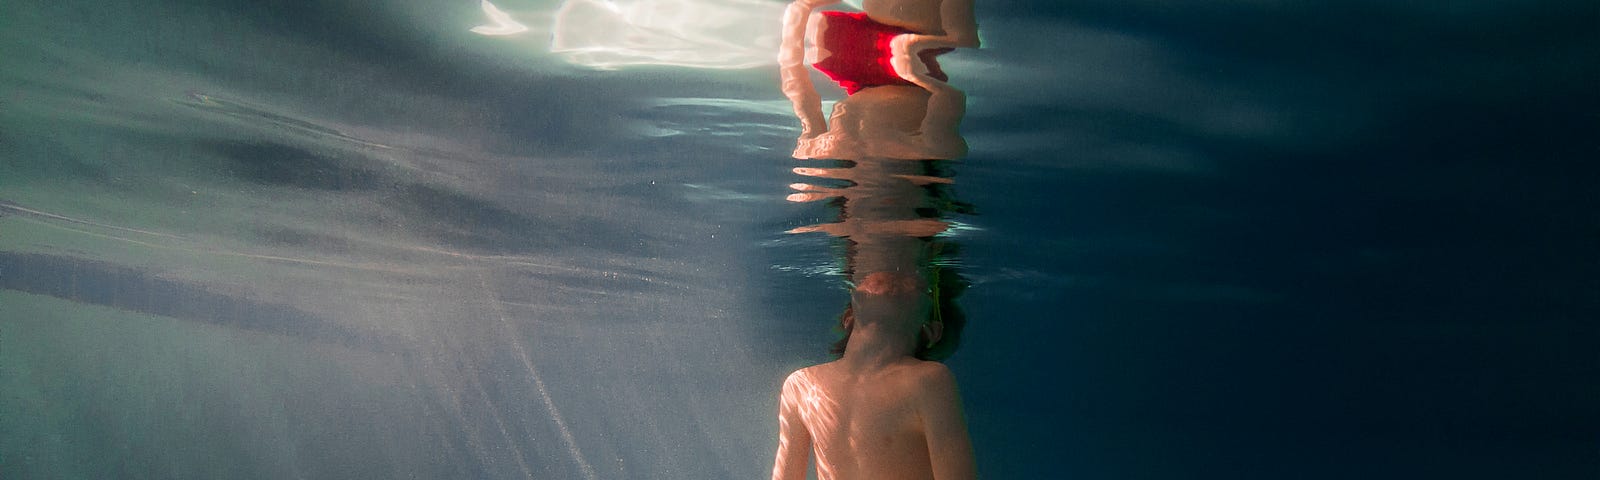 Underwater view of a boy in a swimming pool in the sunlight.